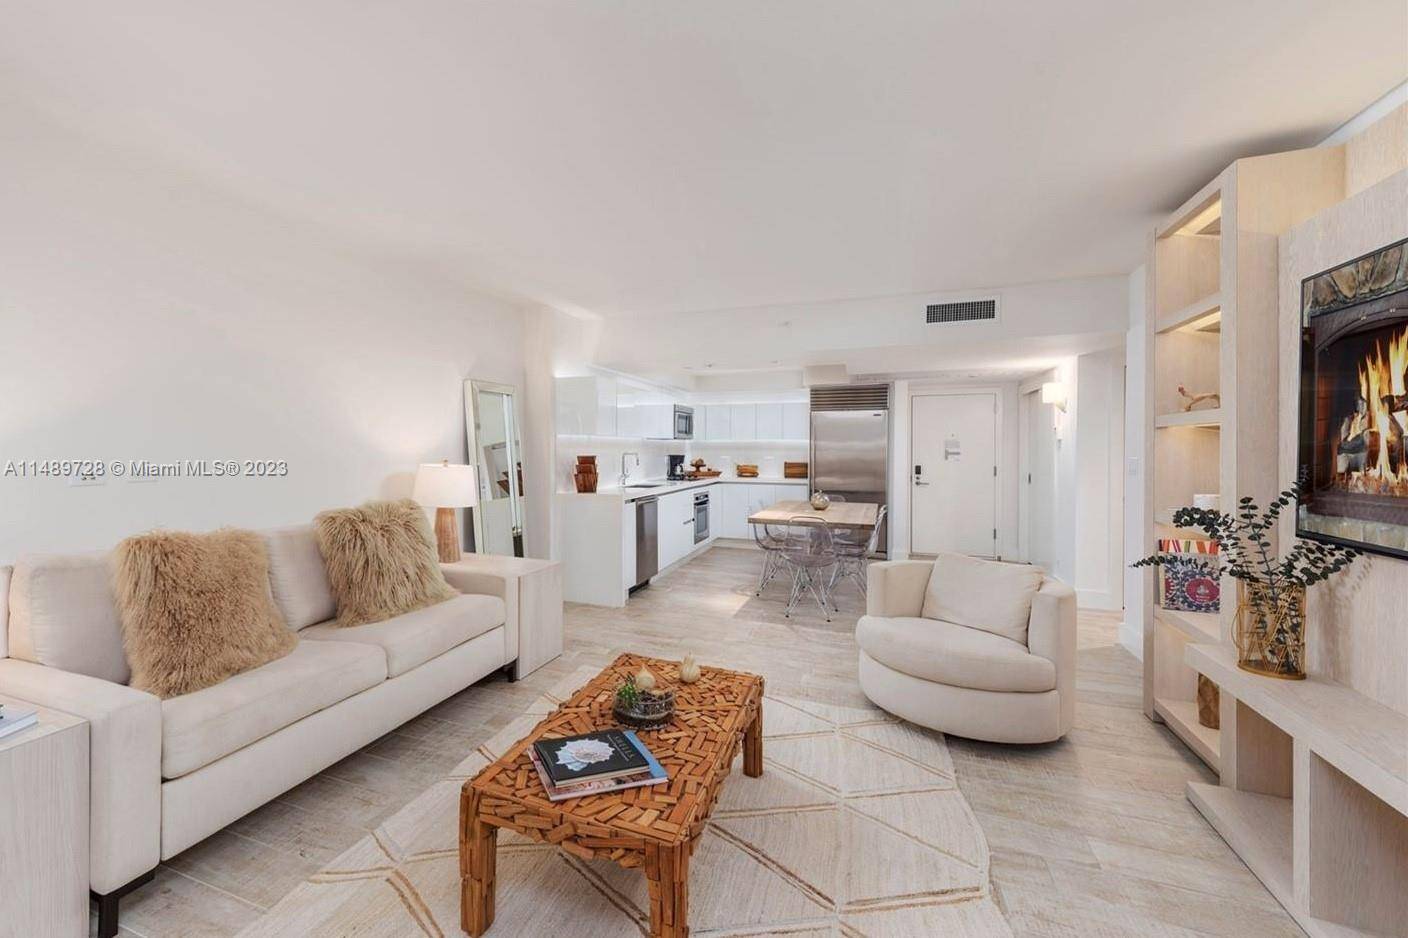 This unit is a 1 bedroom, 1 bathroom apartment with full kitchen, living room spacious balconies with lovely views of the City of Miami Beach.